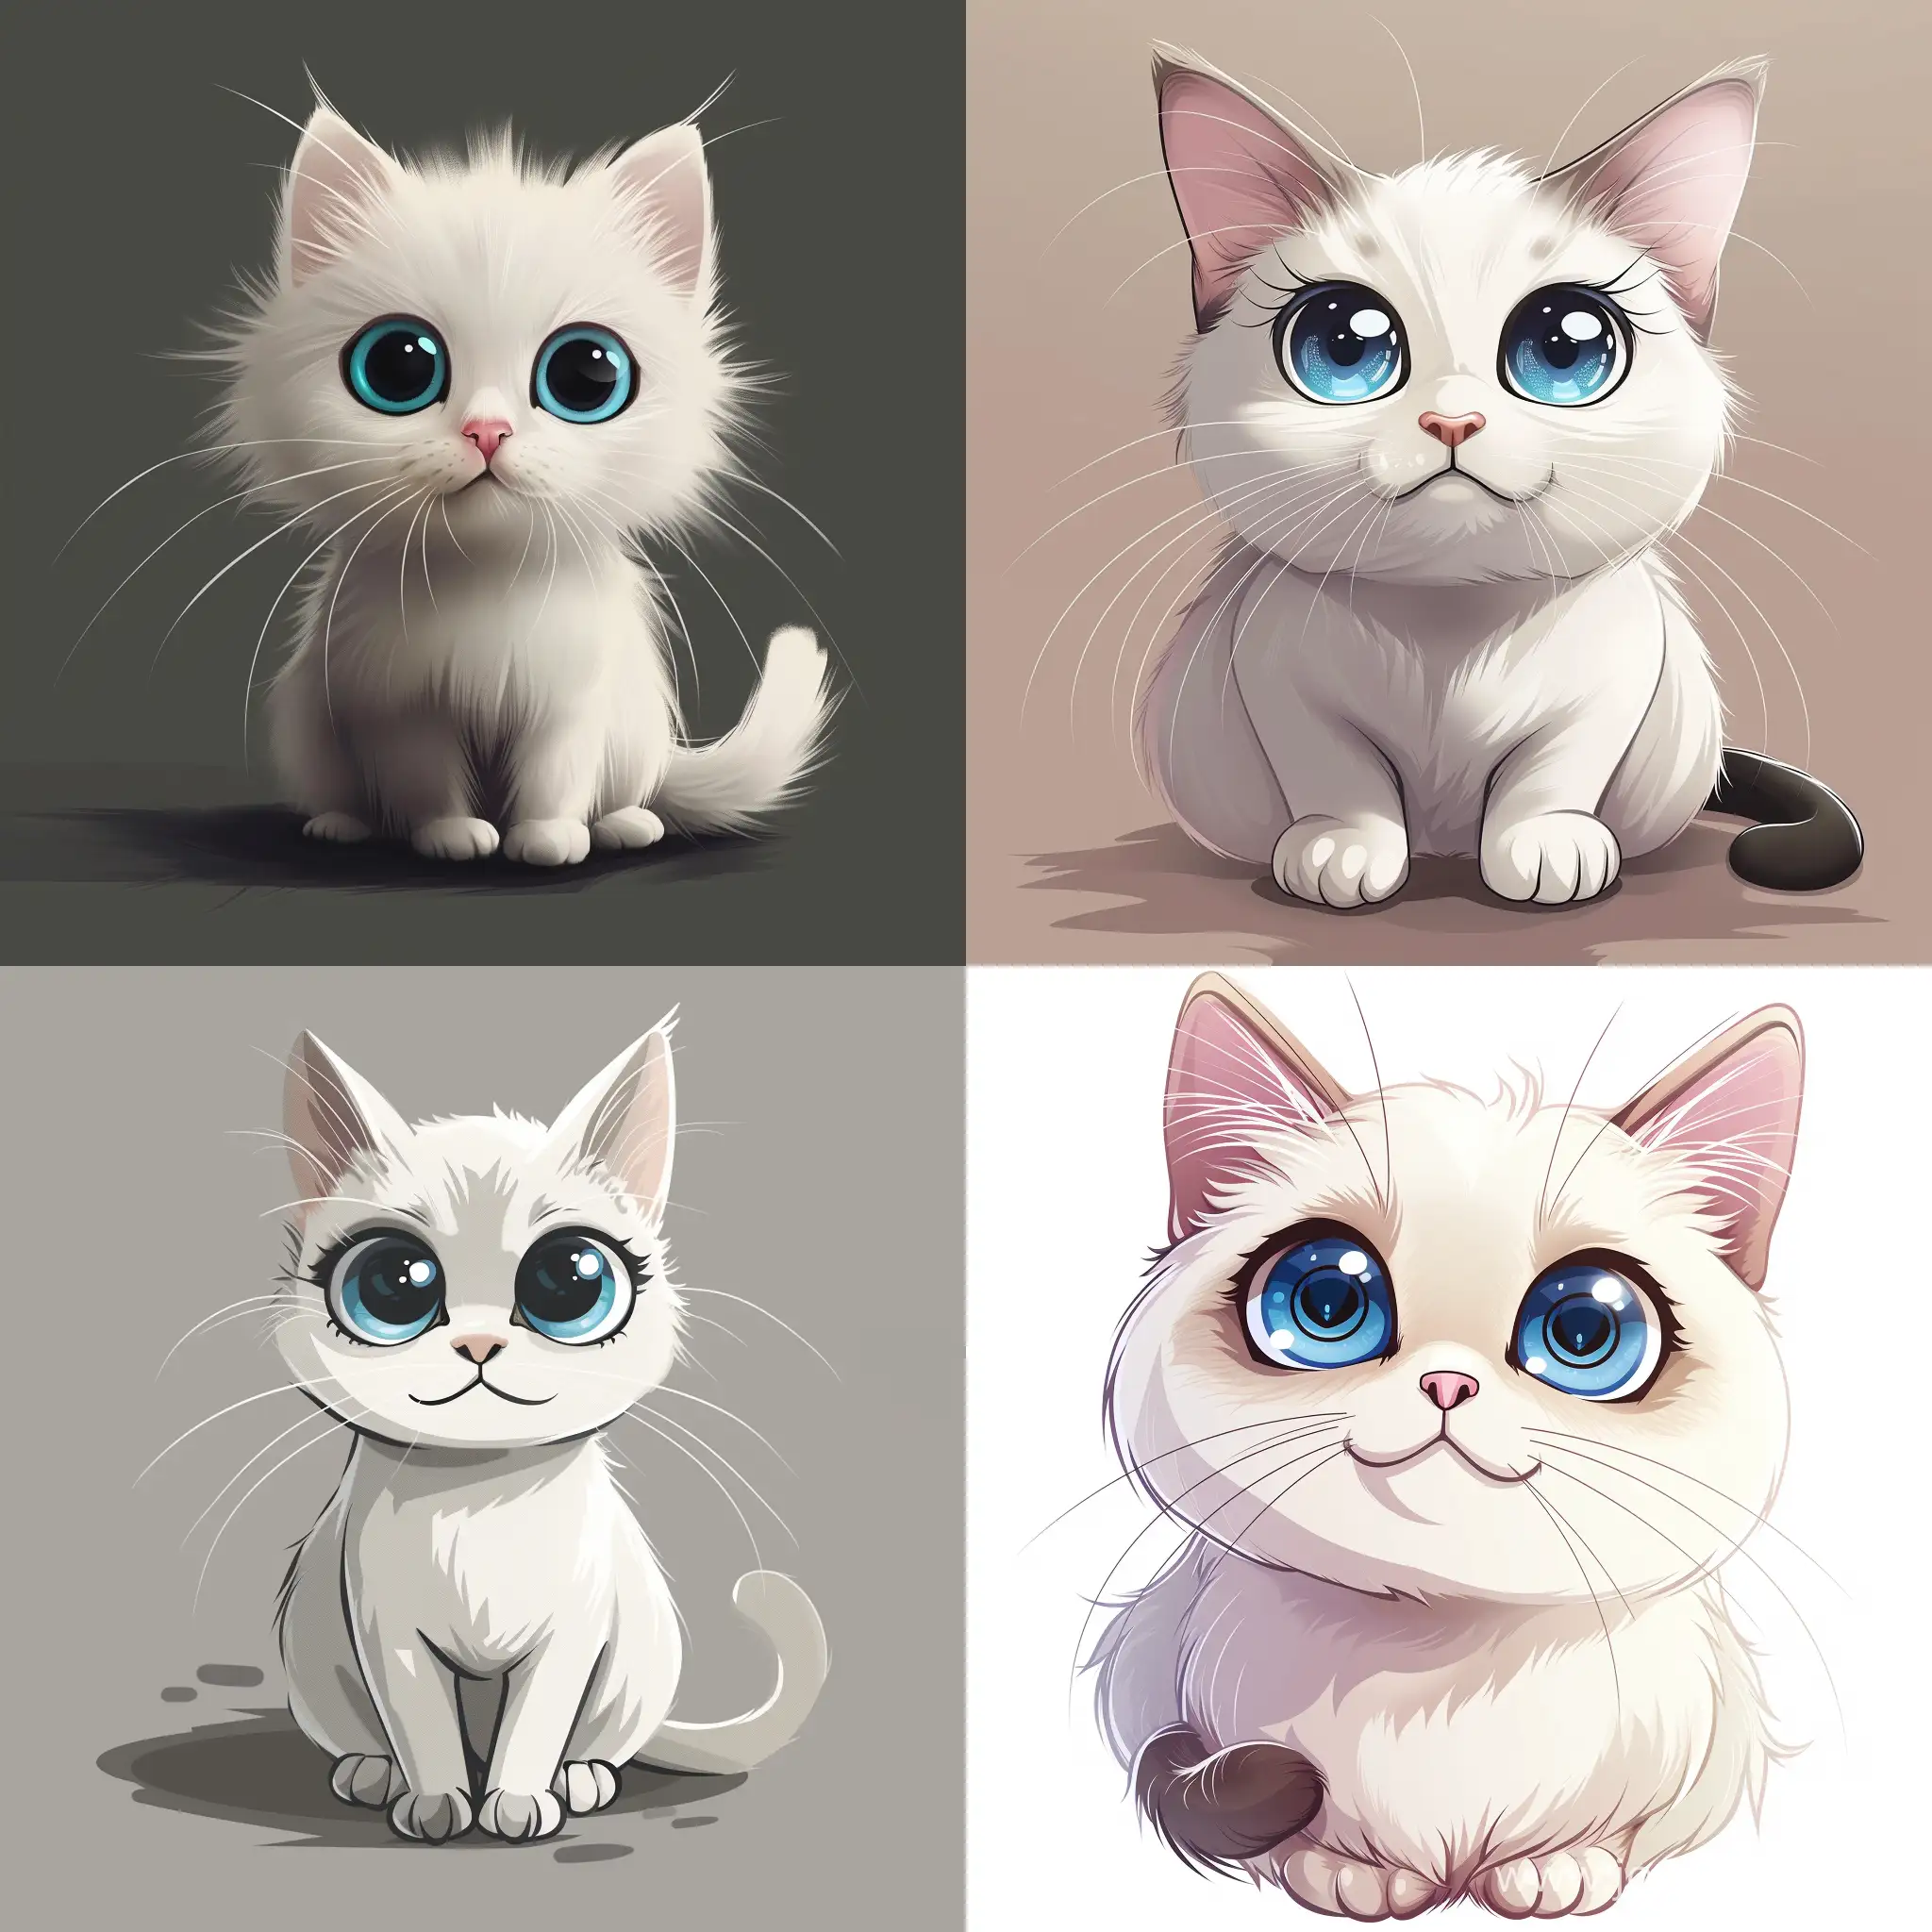 i want a simple illustration of a white Scottish cat with big blue eyes